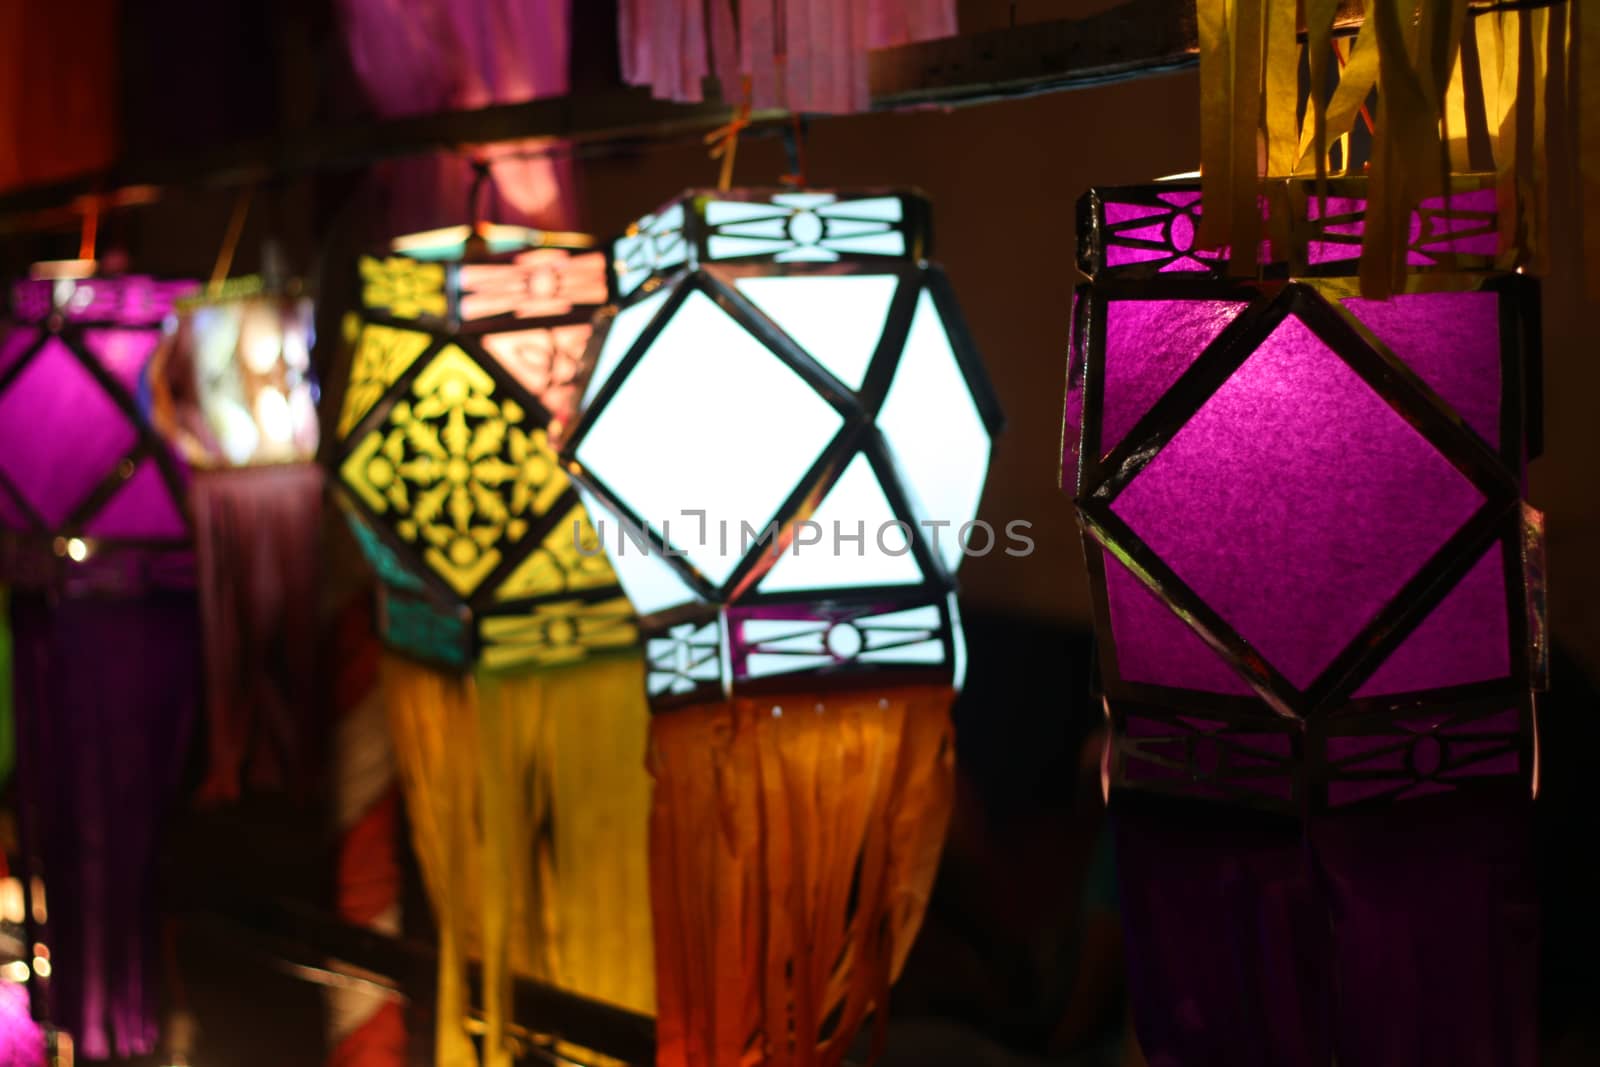 Traditional handmade lanterns lit up on the occassion of Diwali festival in India.